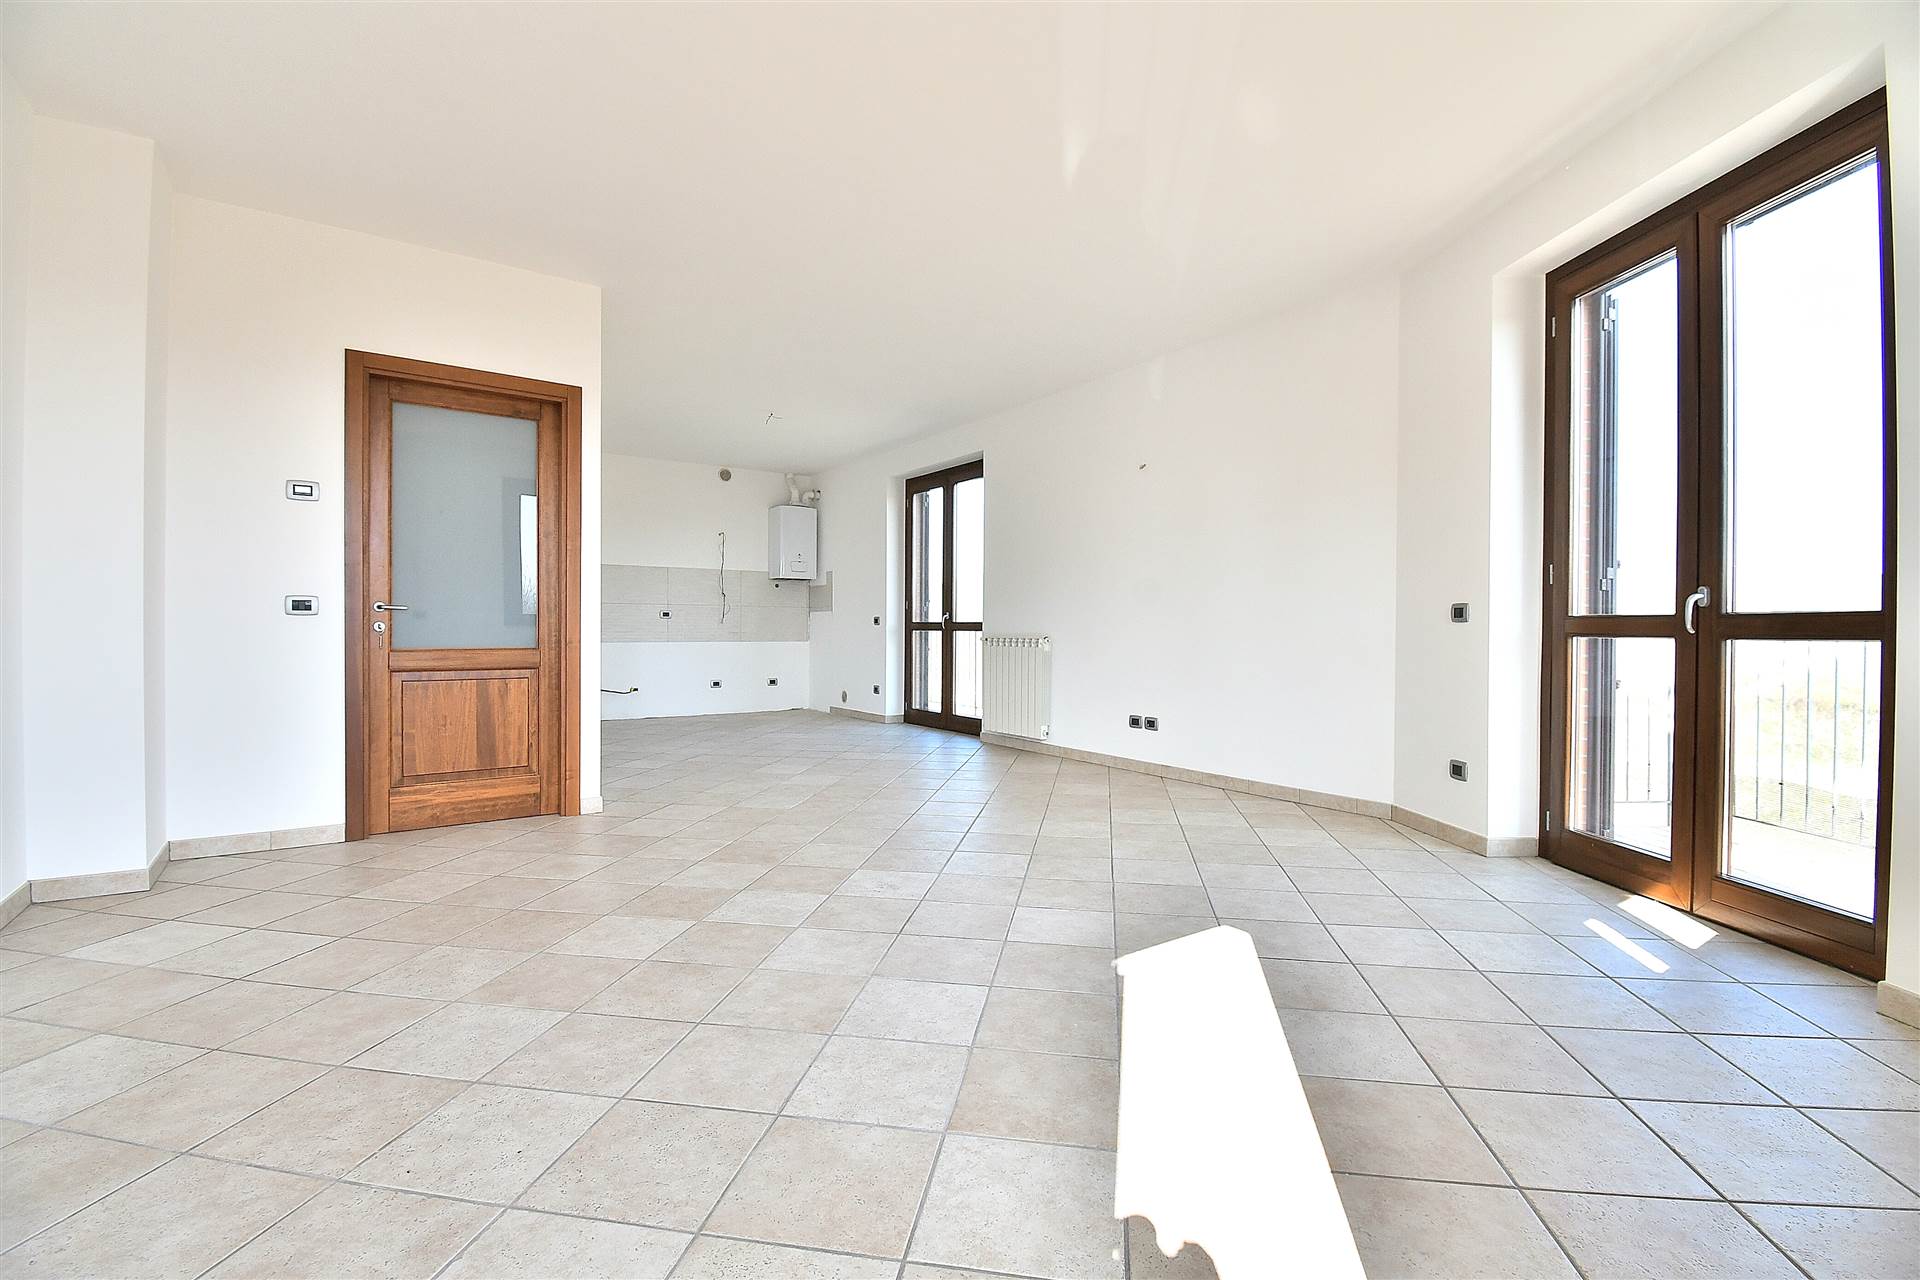 MORE DI CUNA, MONTERONI D'ARBIA, Apartment for sale of 105 Sq. mt., Excellent Condition, Heating Individual heating system, Energetic class: D, 